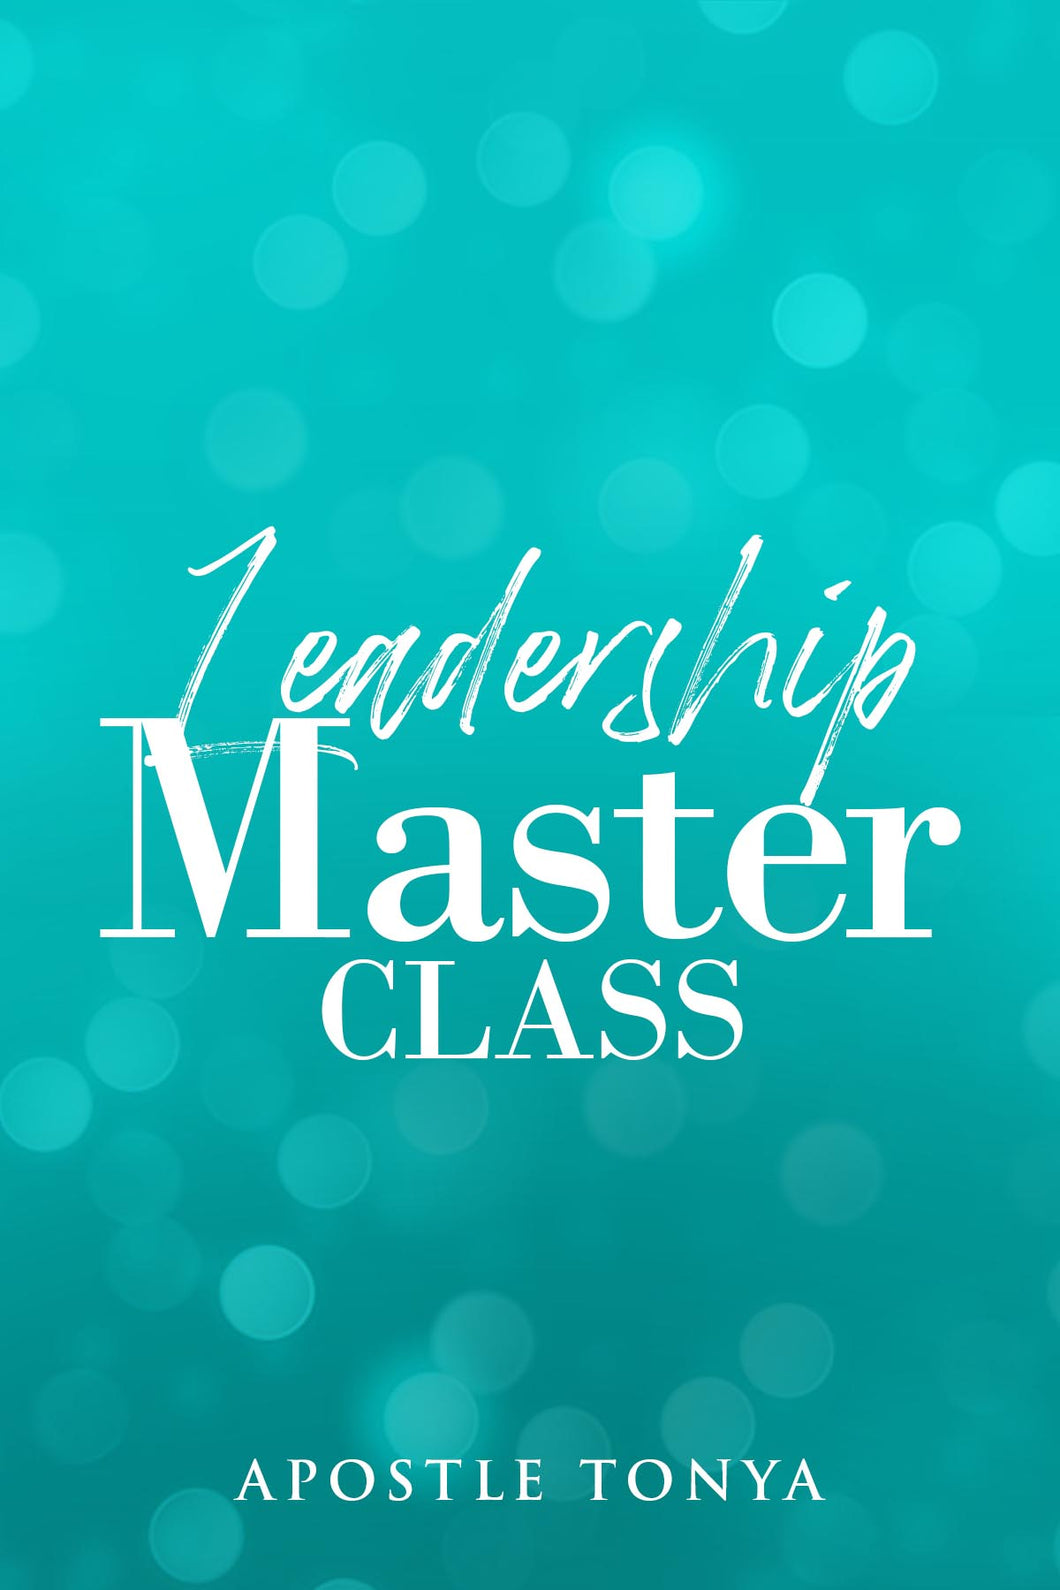 Leadership Master Class:  Hearing the Voice of God, Serving as a Leader (Part 2)